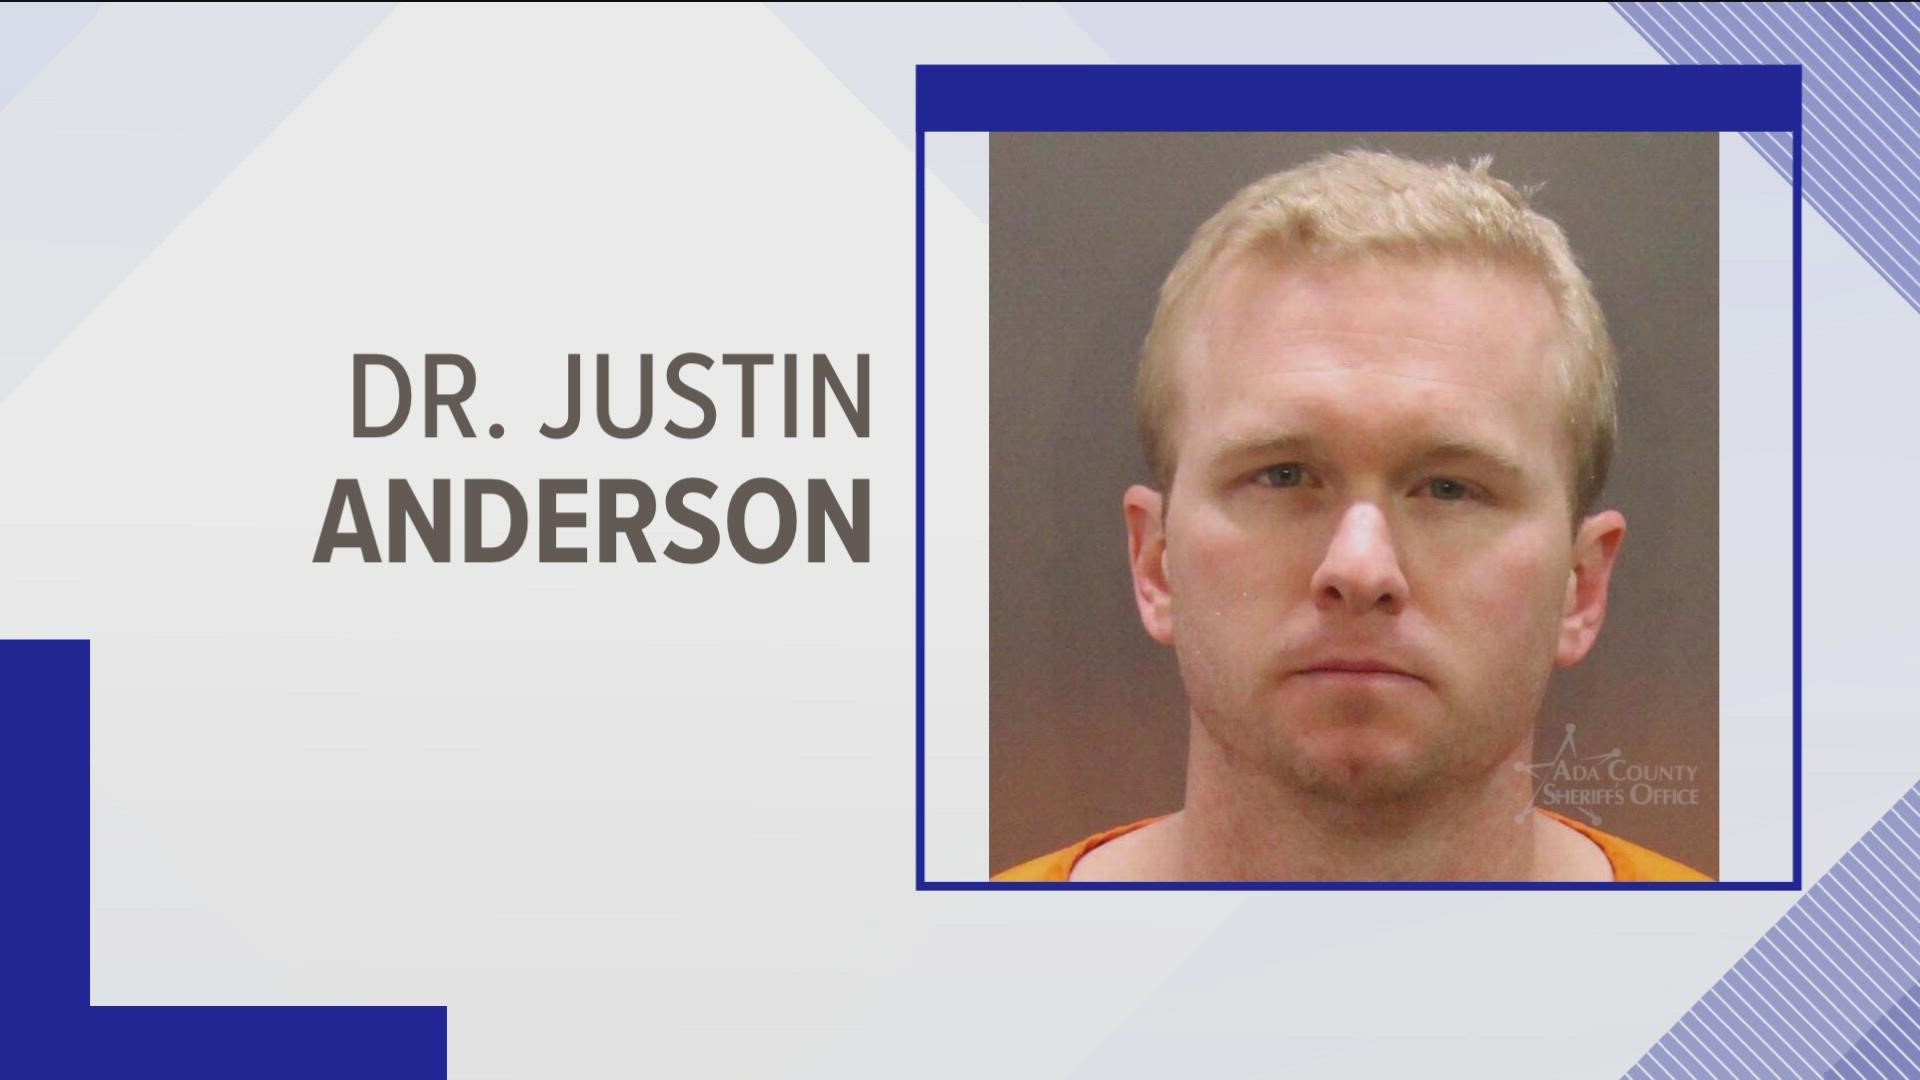 Dr. Justin Anderson was arrested Wednesday on two counts of video voyeurism. Police say a woman found a recording device in a room where she changed her clothes.